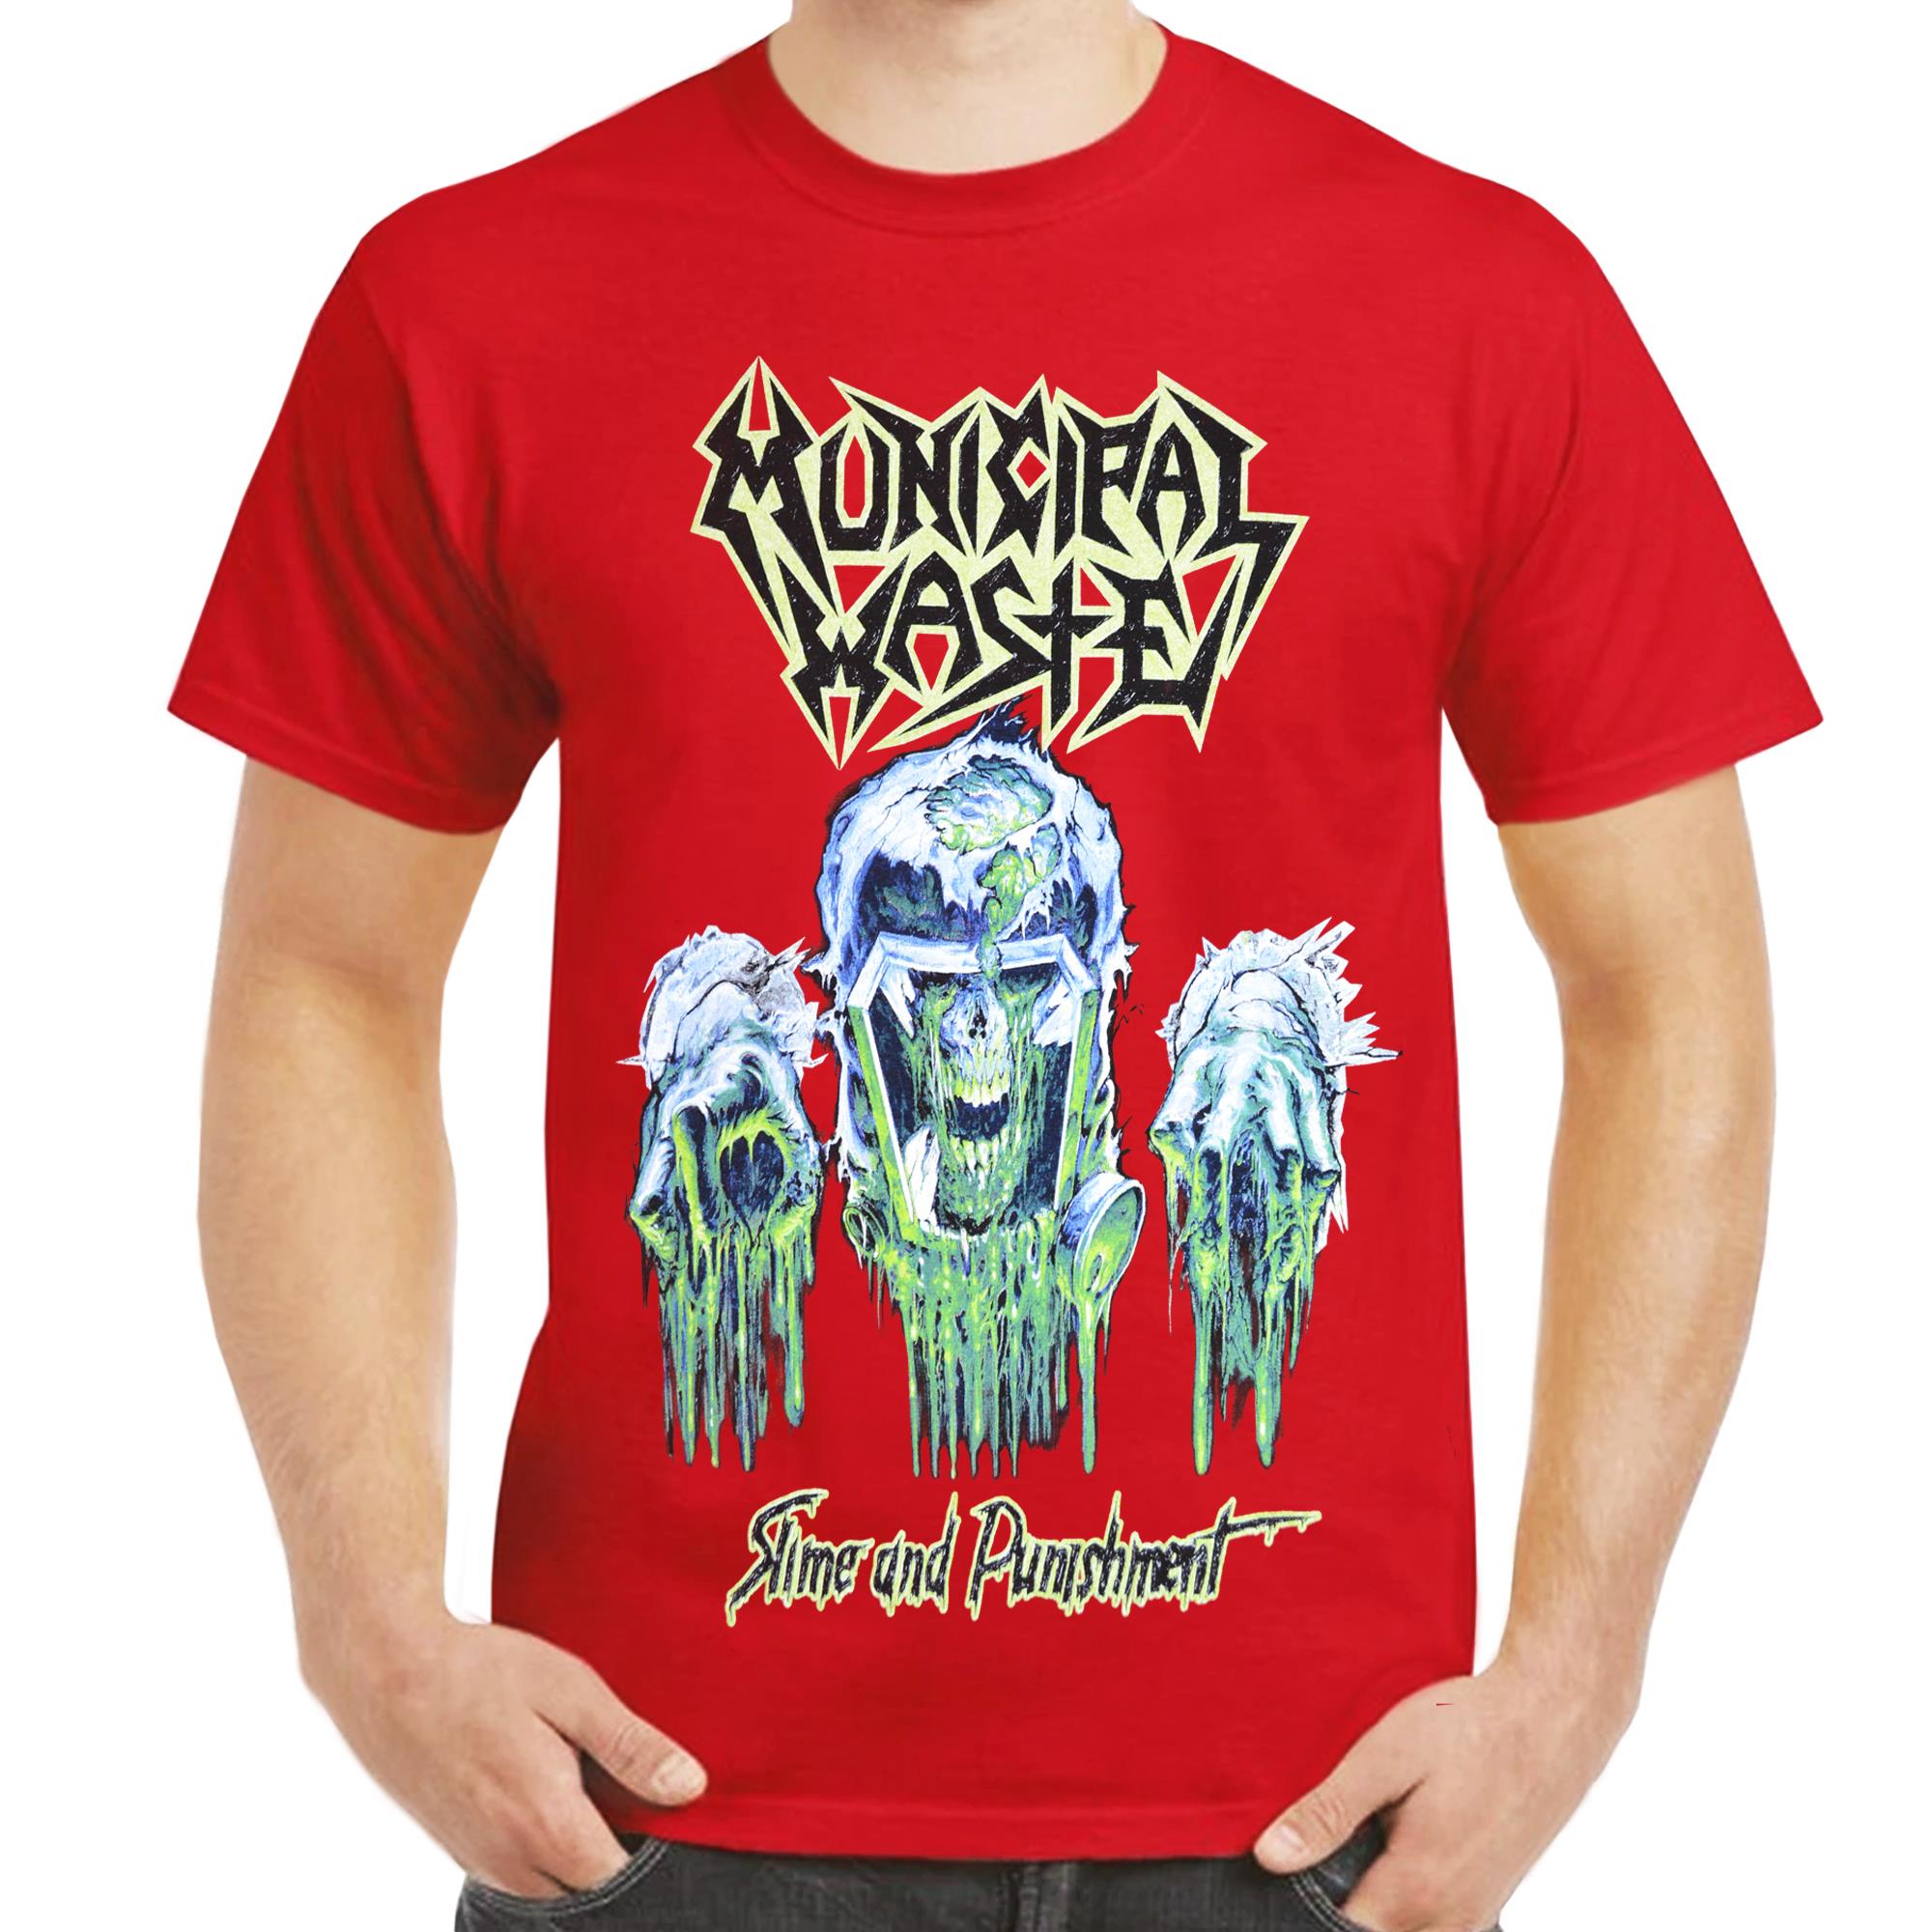 Slime And Punishment T-Shirt